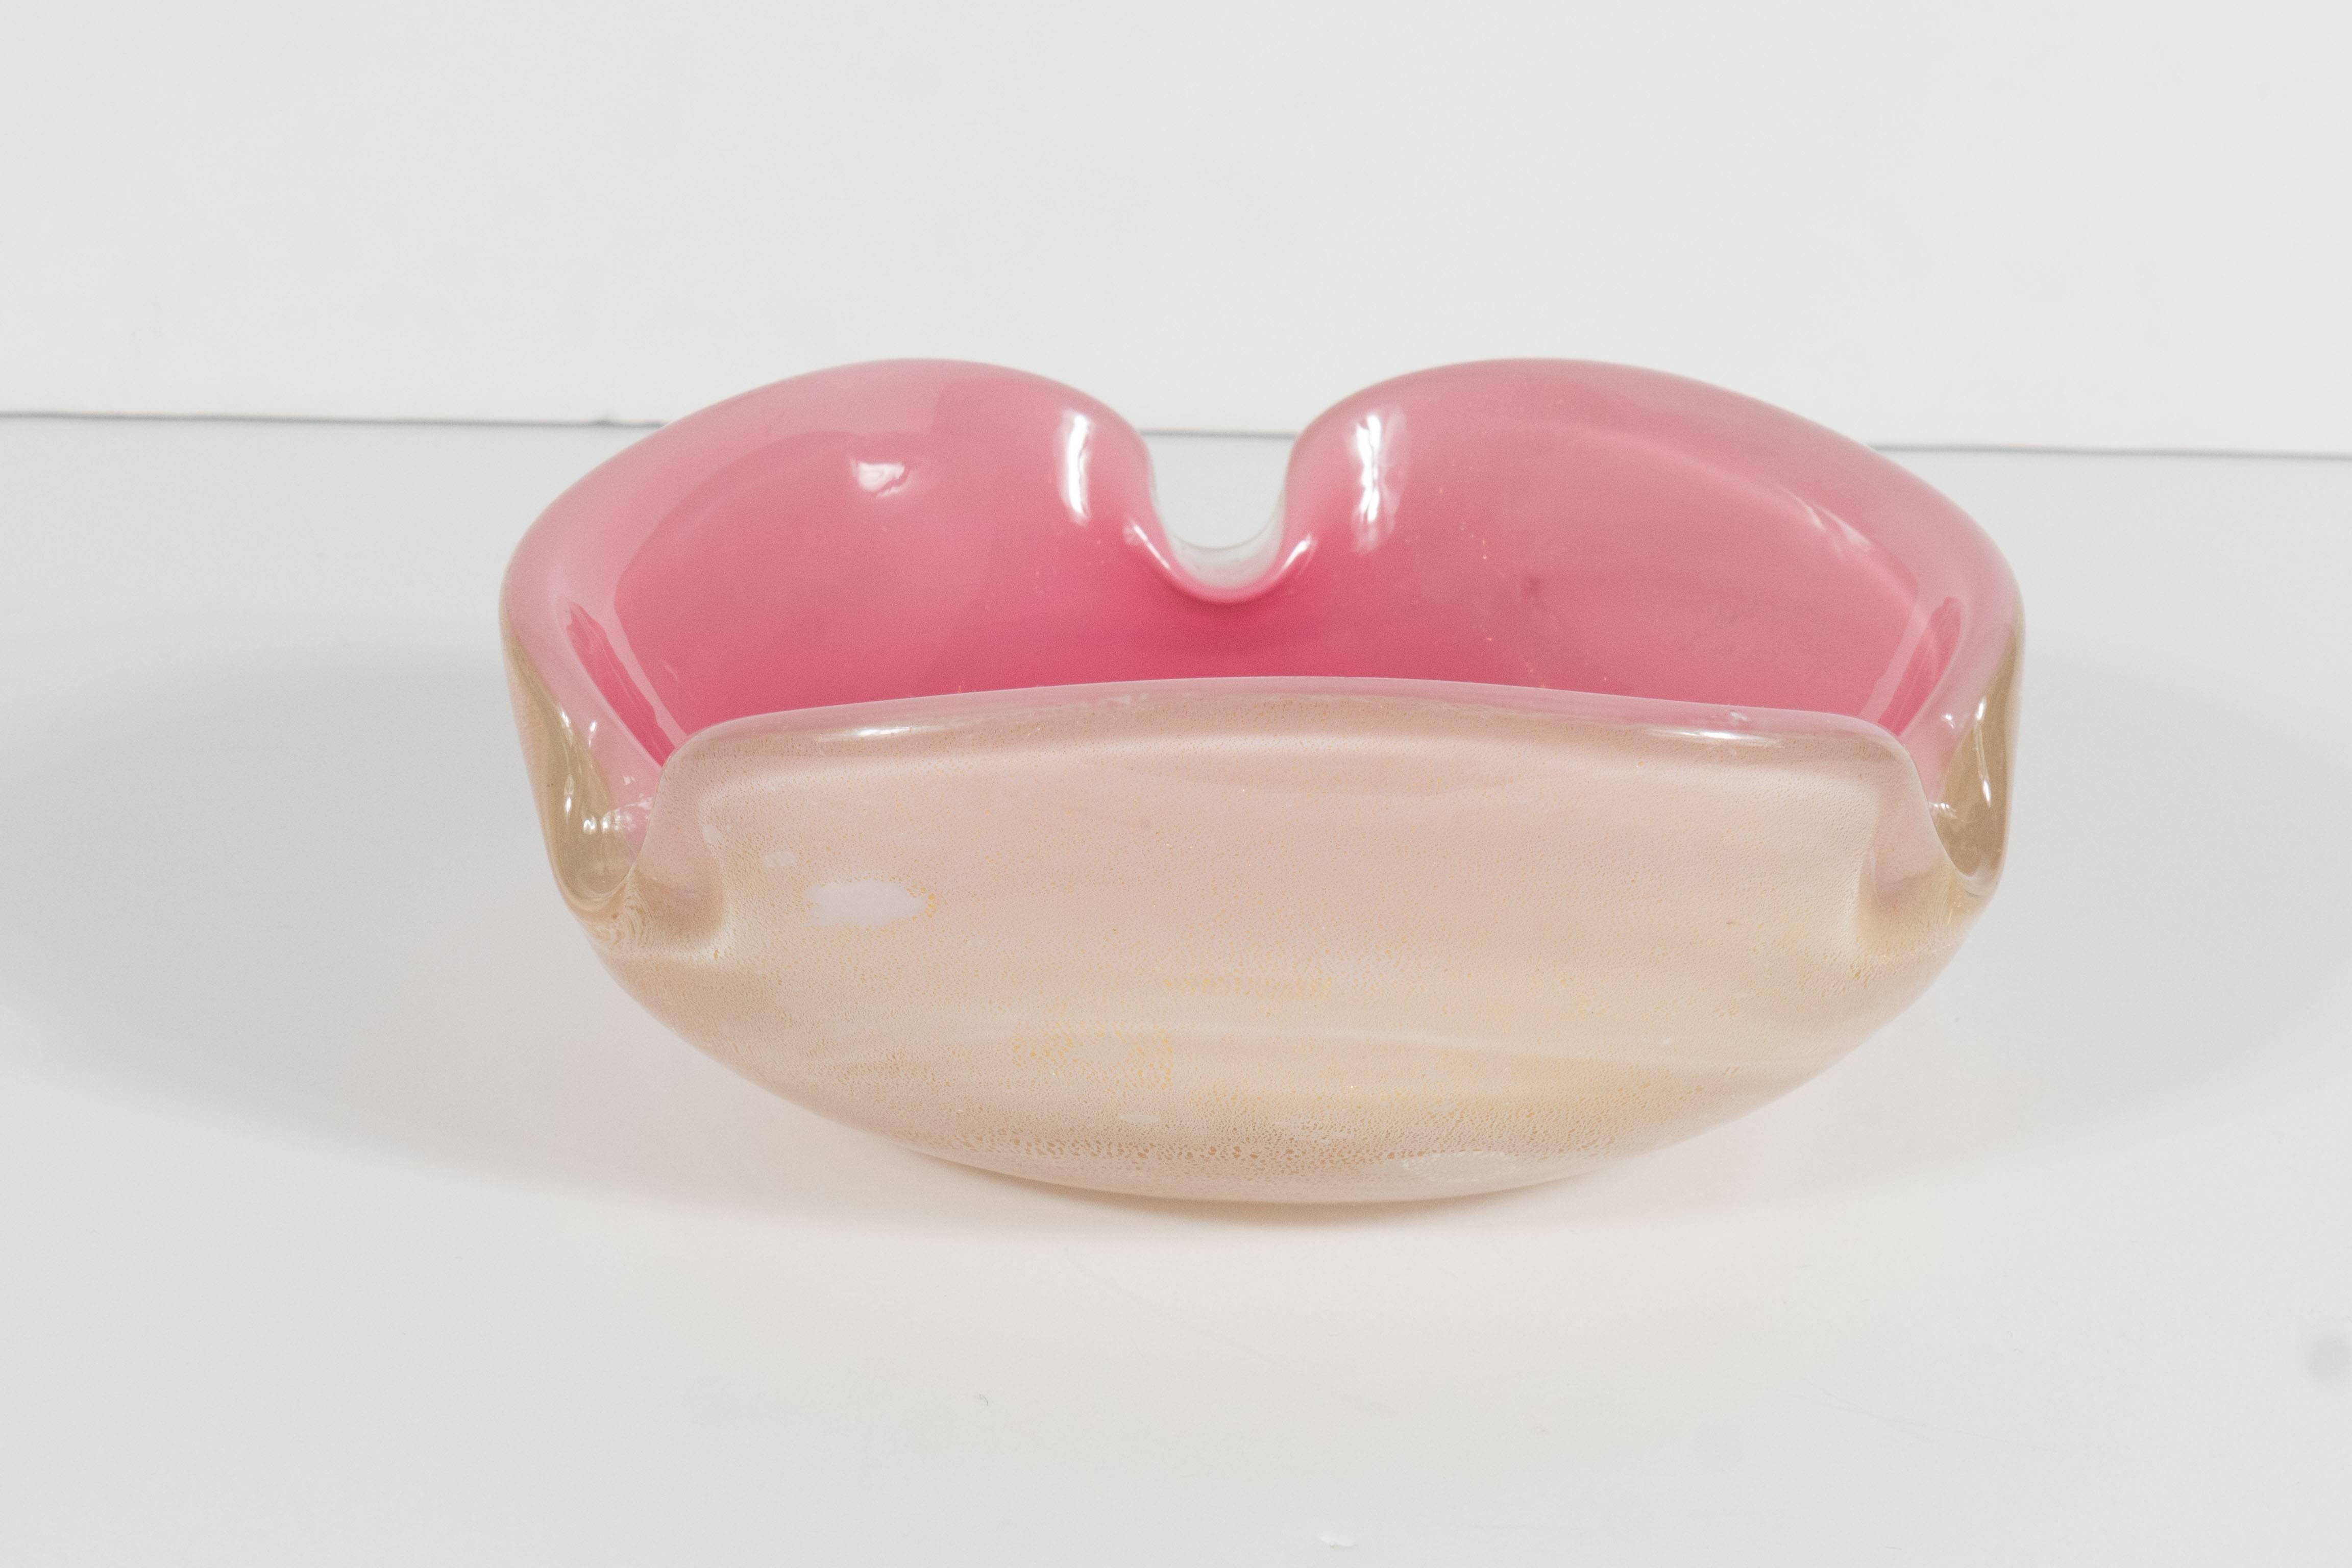 Mid-Century Modern Handblown Murano Glass Ashtray in Hues of Rose and Pink with Yellow Gold